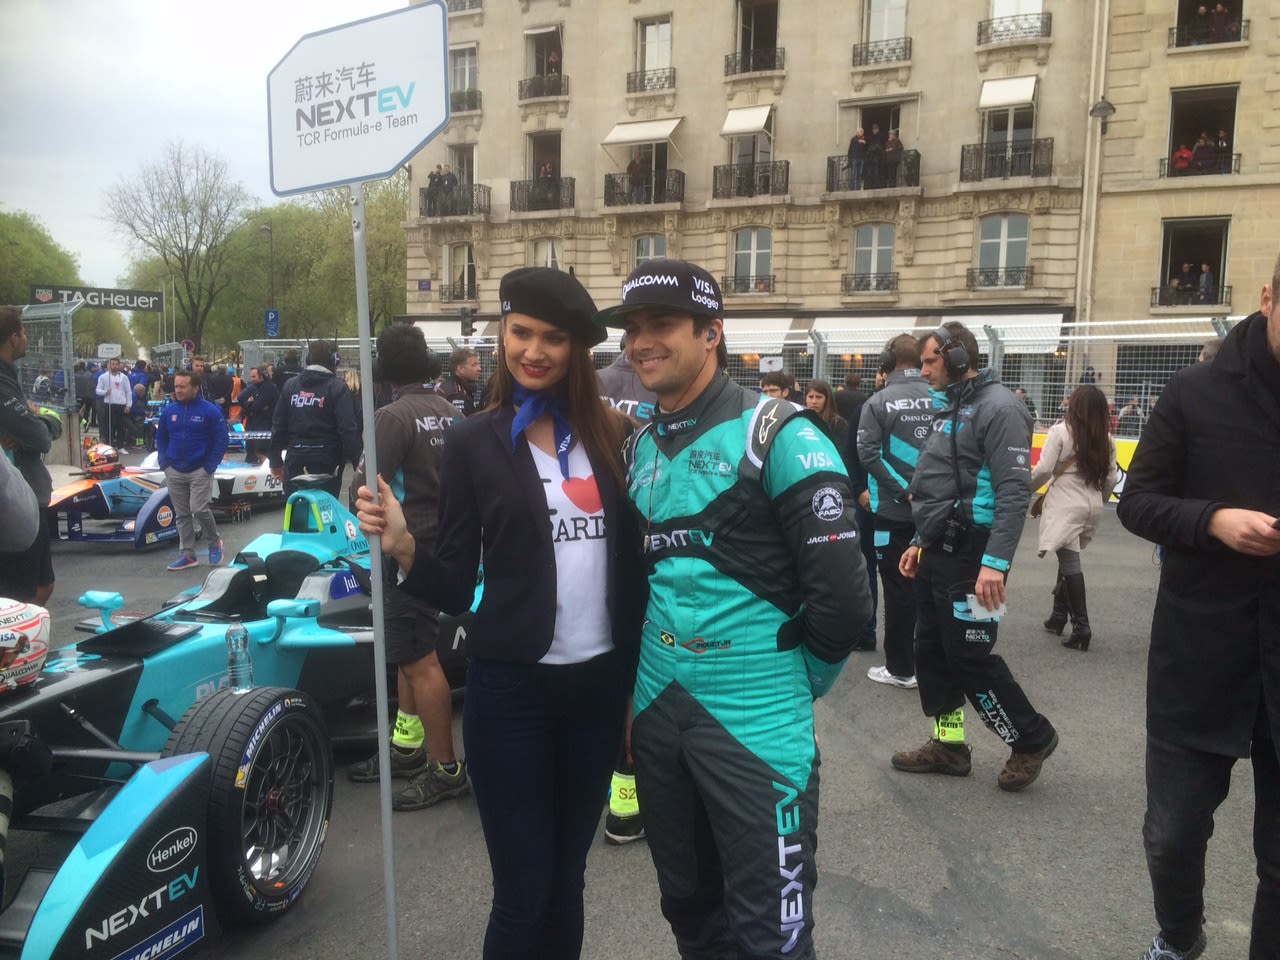 Formula E's reigning champion Nelson Piquet Jr, seen here with a grid girl wearing a 'I Heart Paris' t-shirt, says: "Paris has got to easily be in the top-three venues -- maybe the best one."